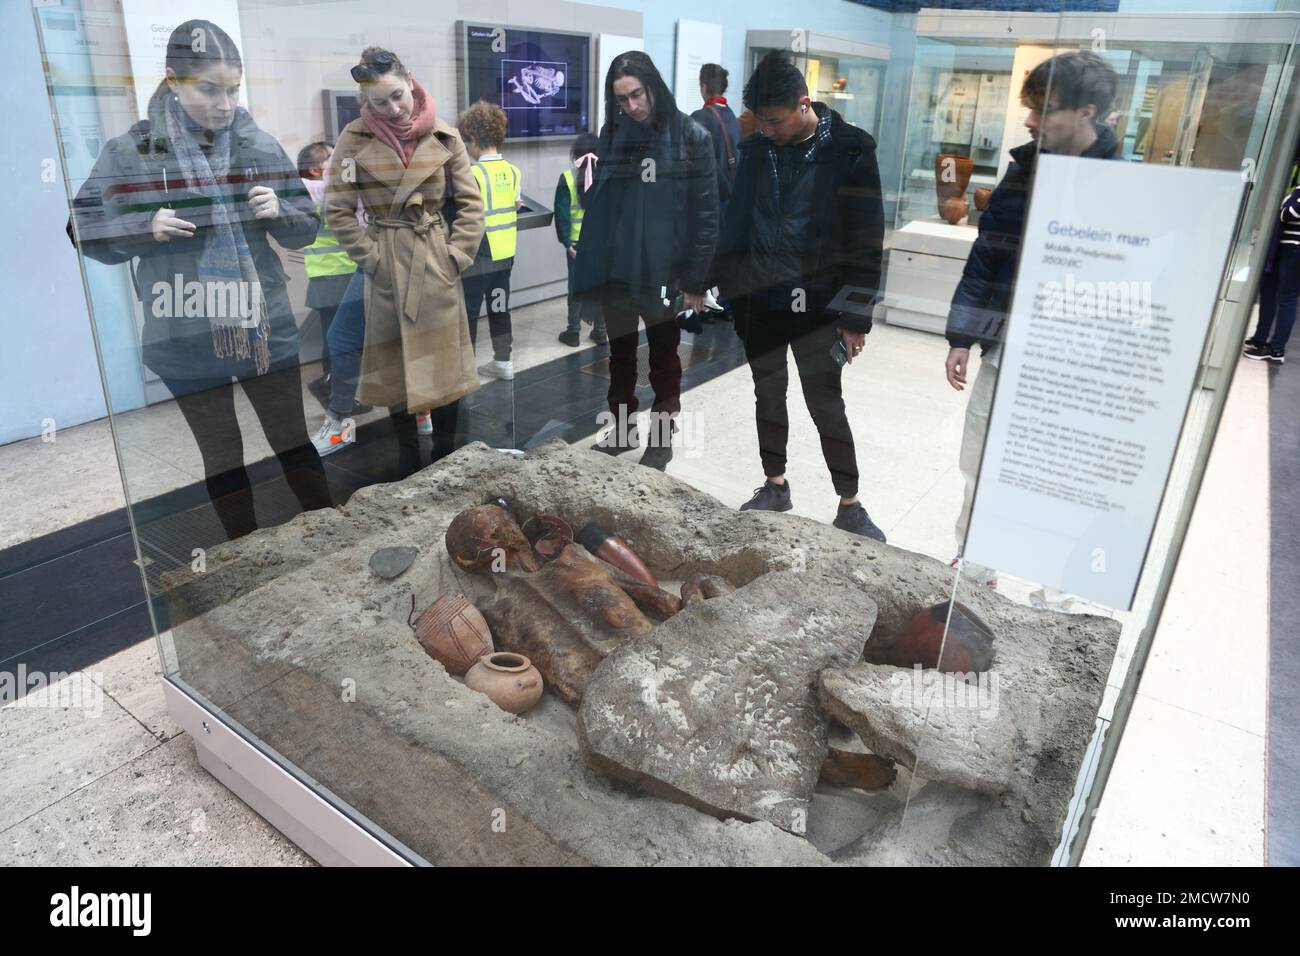 Visitors study the mummified remains of the Gebelein man from the predynastic period at the British Museum, London, UK Stock Photo